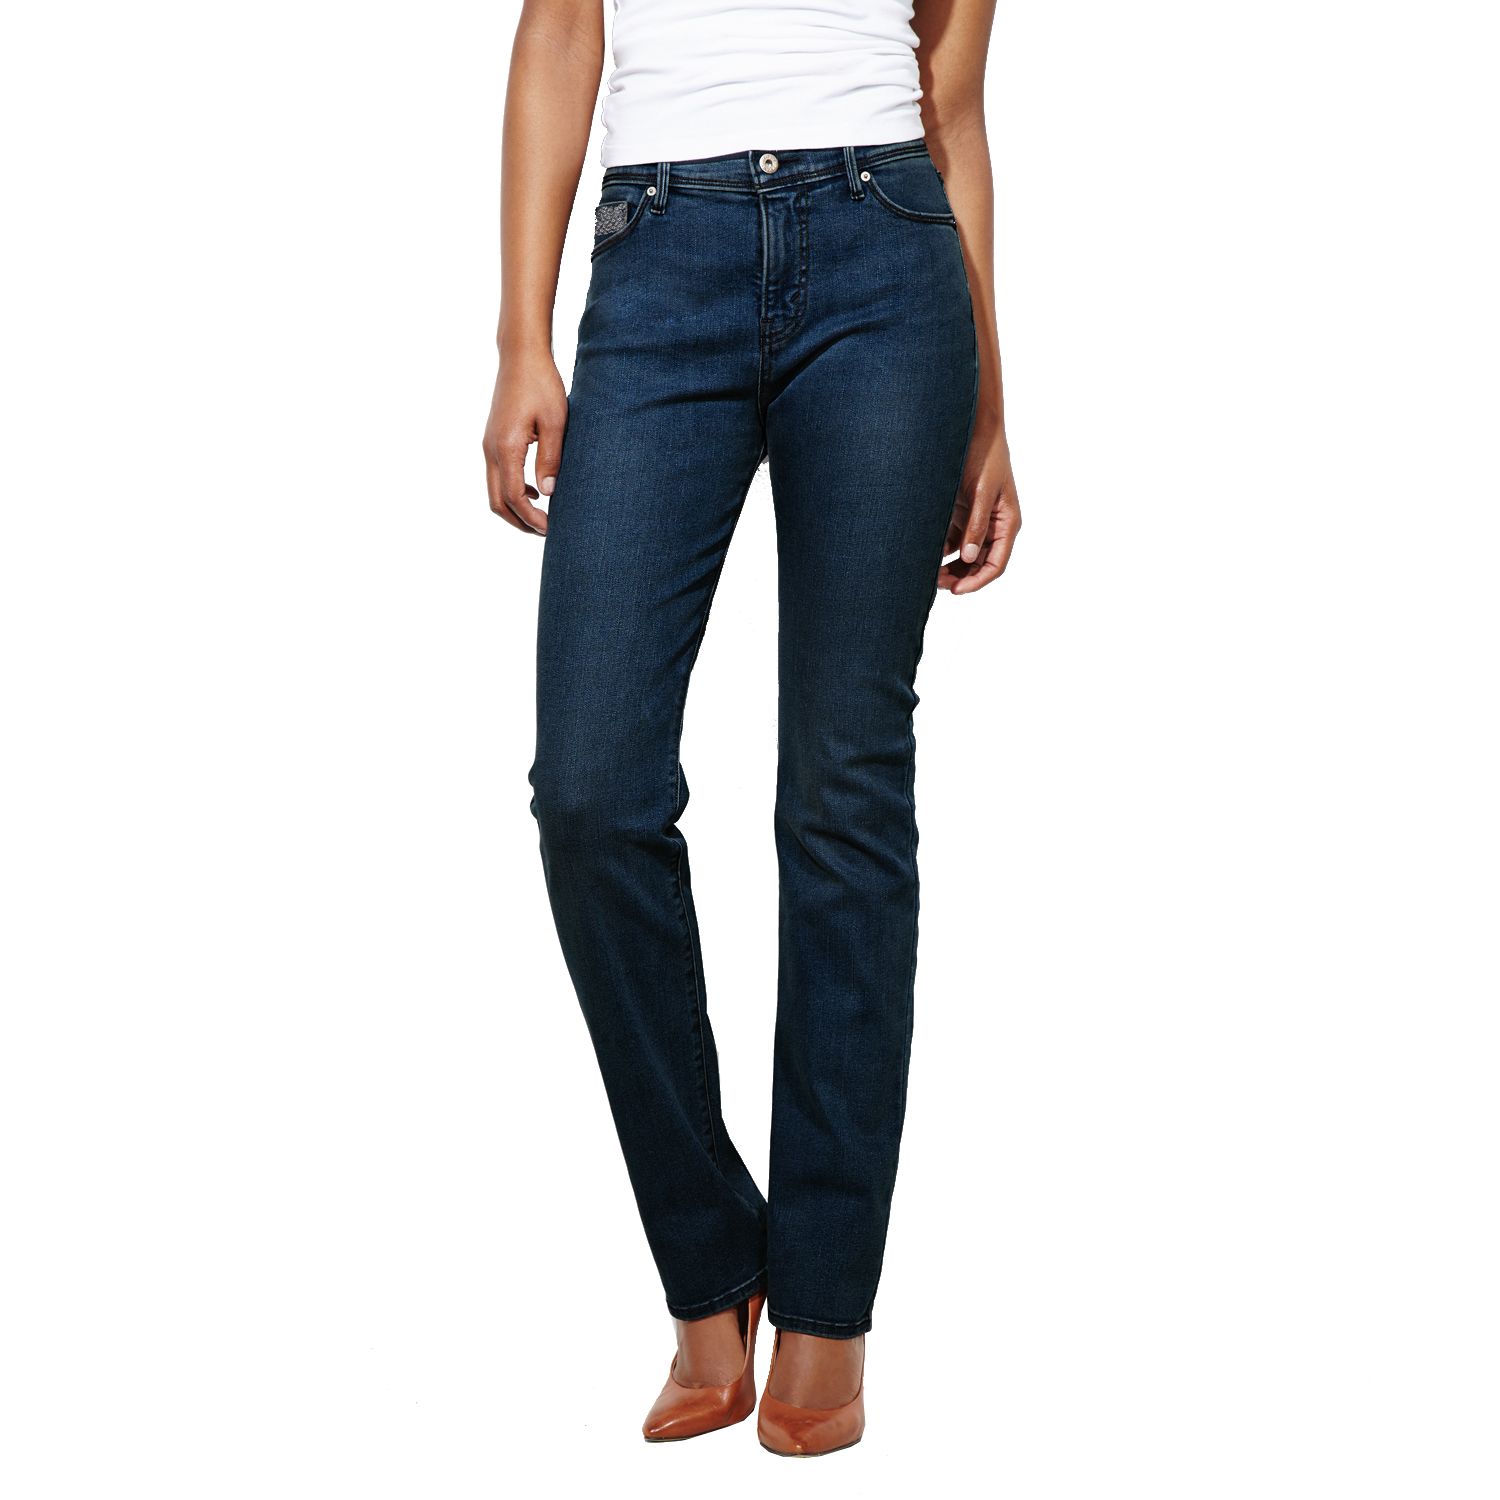 512 Perfectly Slimming Straight Leg Jeans